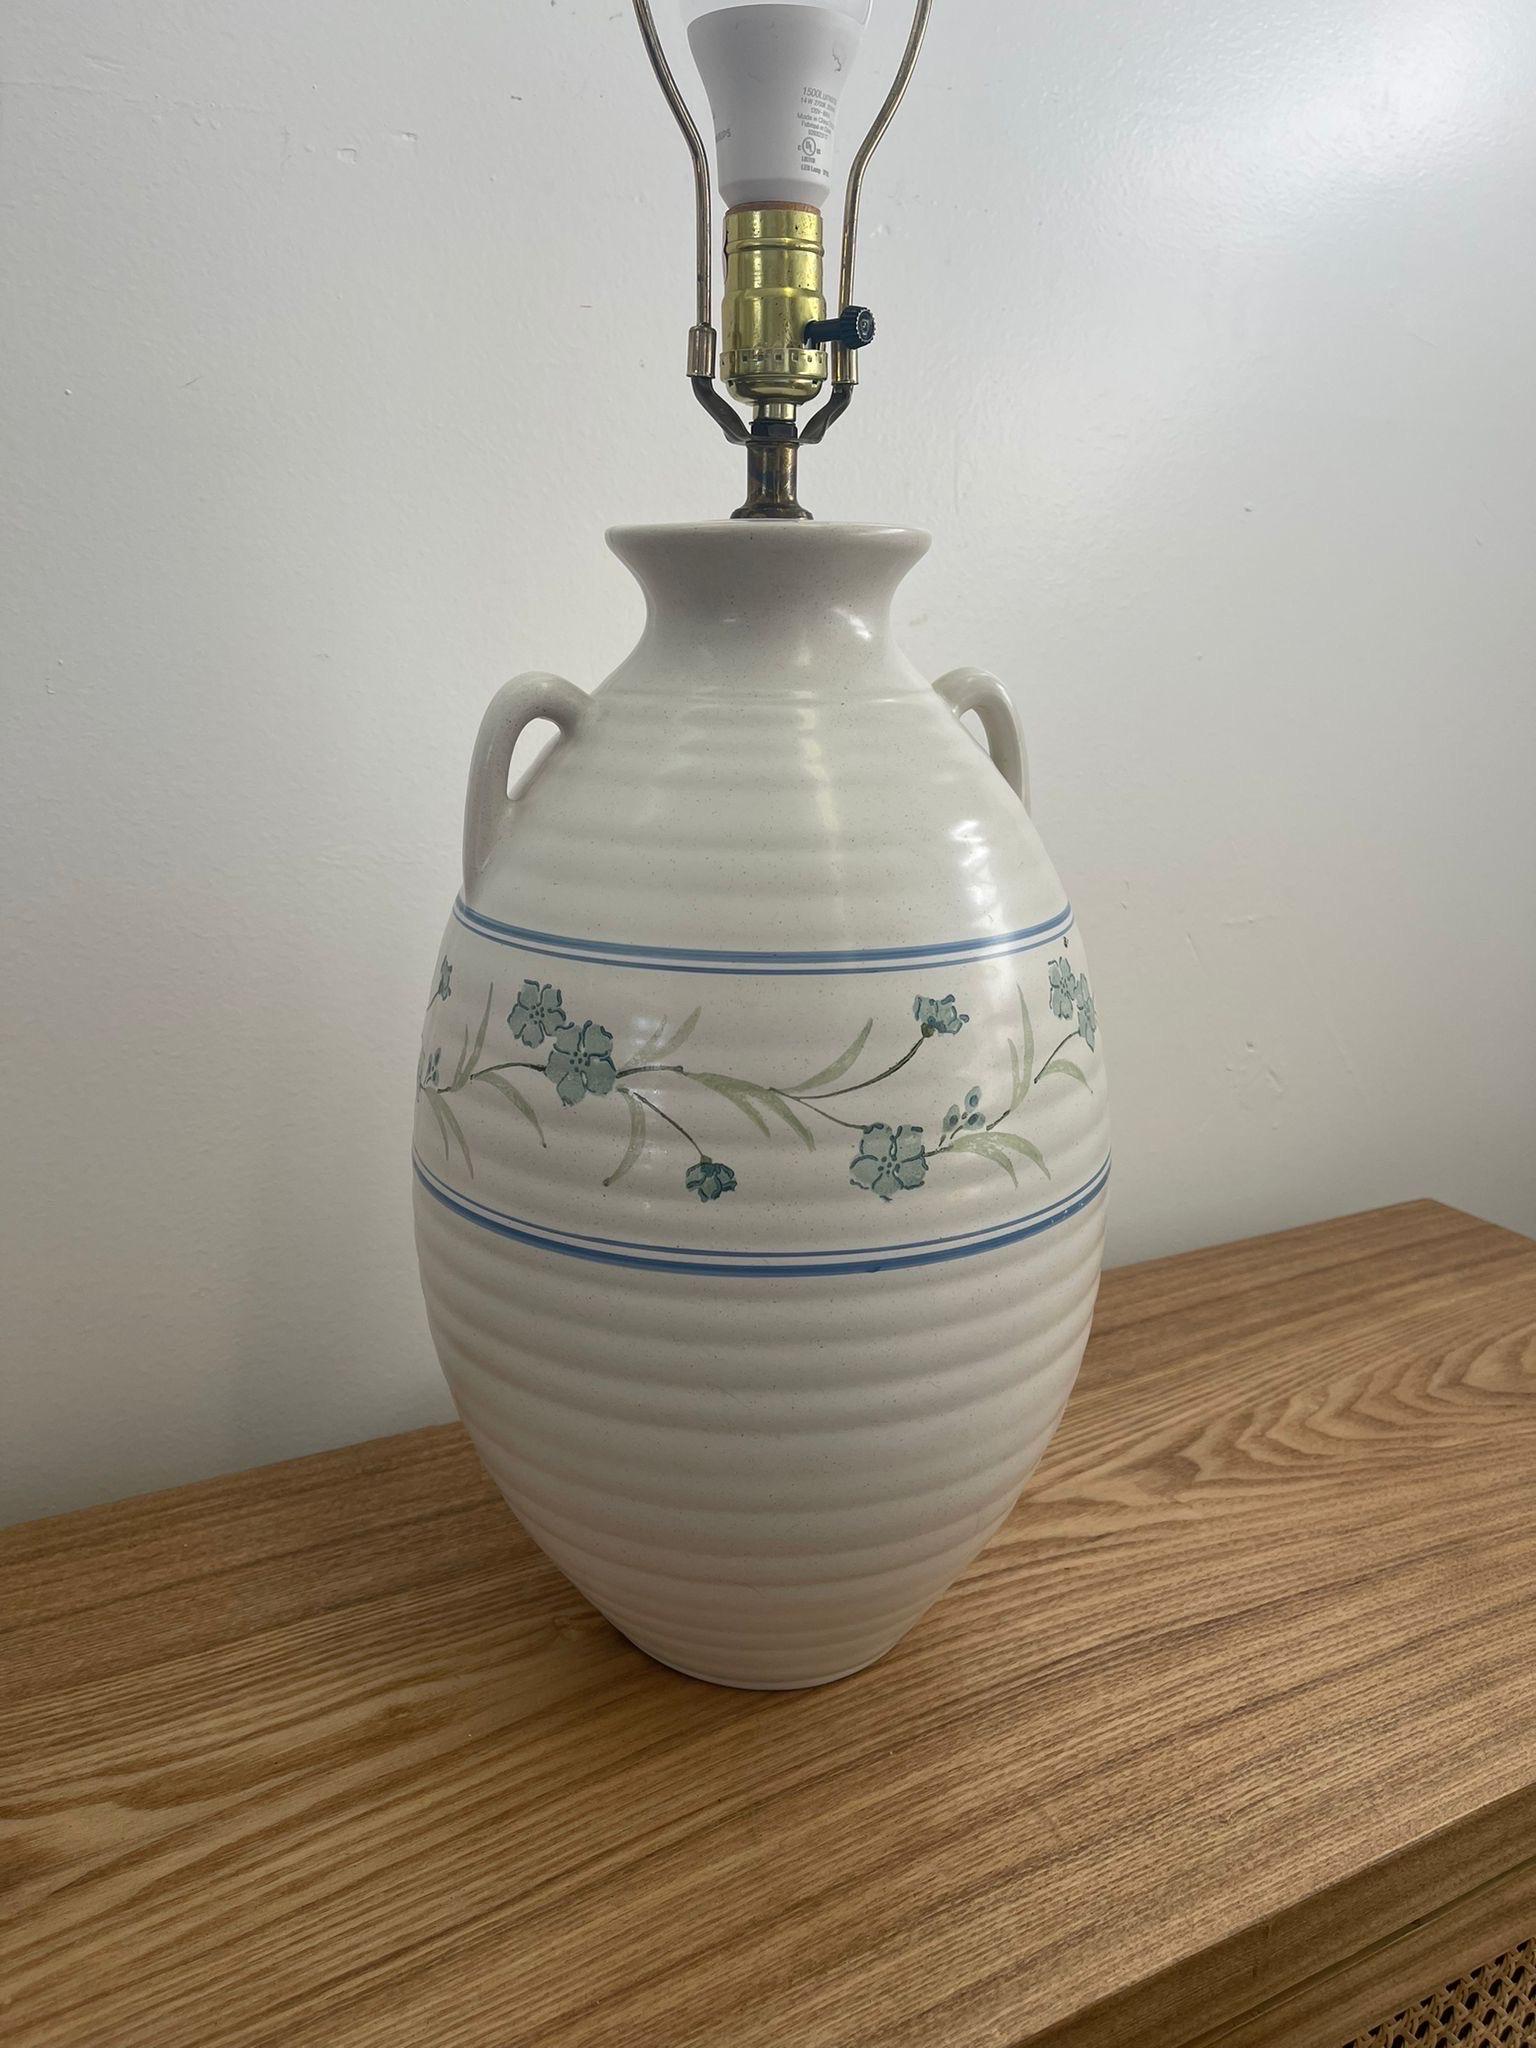 This White toned Ceramic Base has blu and green floral detailing hand painted onto it. Two handles. Light Bulb not Included. Vintage Condition Consistent with Age as Pictured.

Dimensions. 10 Diameter; 27 H